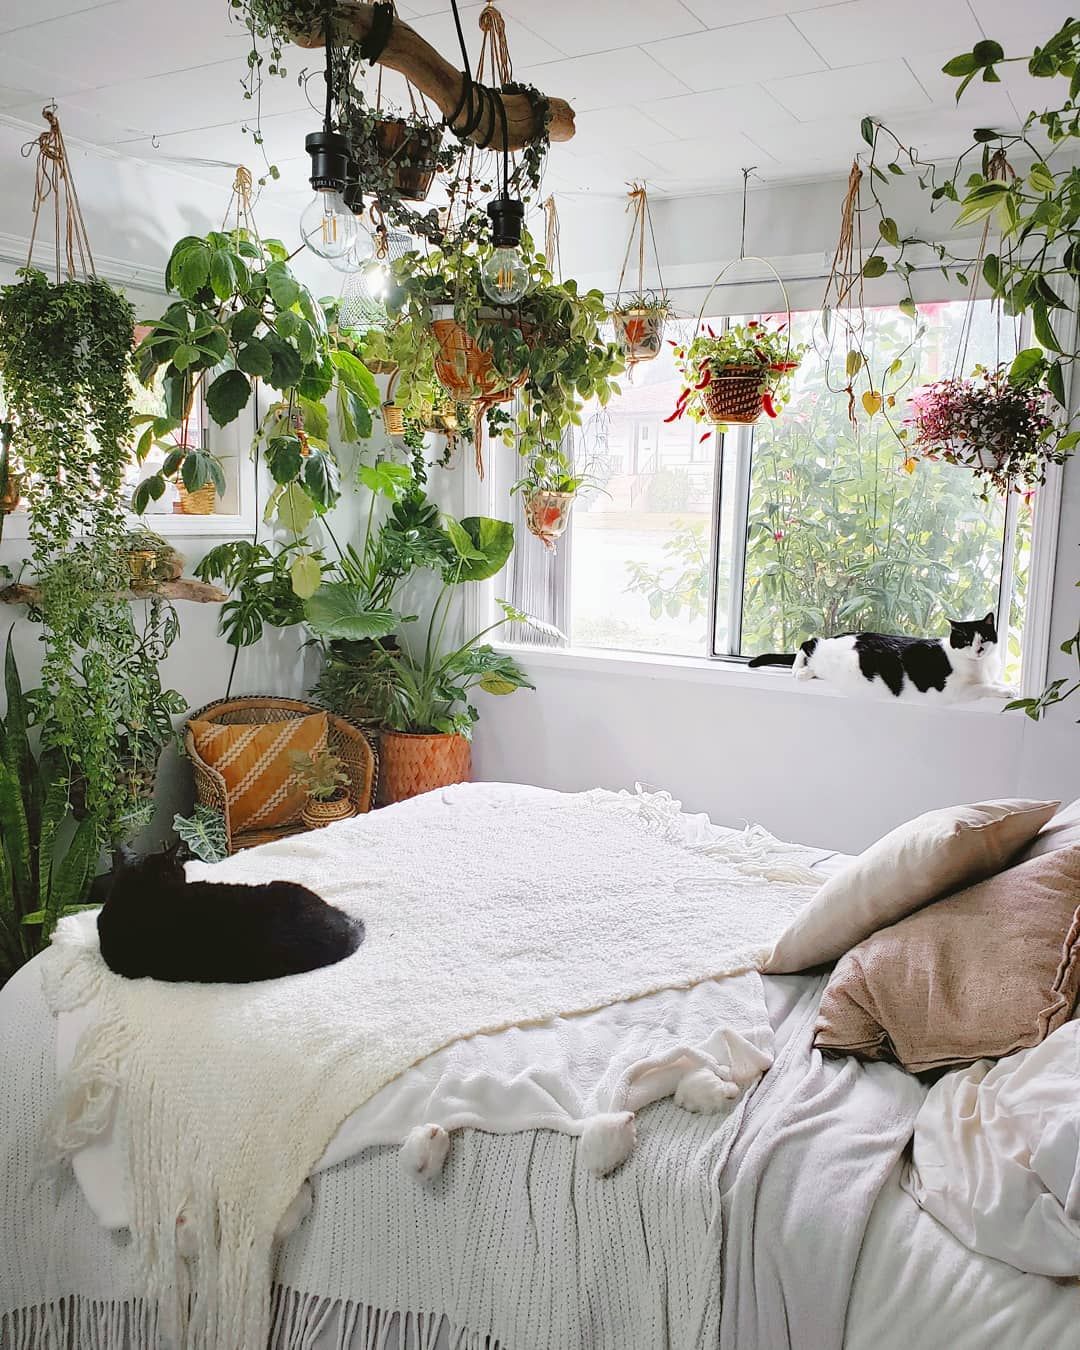 3 Bedroom Plants That Will Drastically Improve Your Health